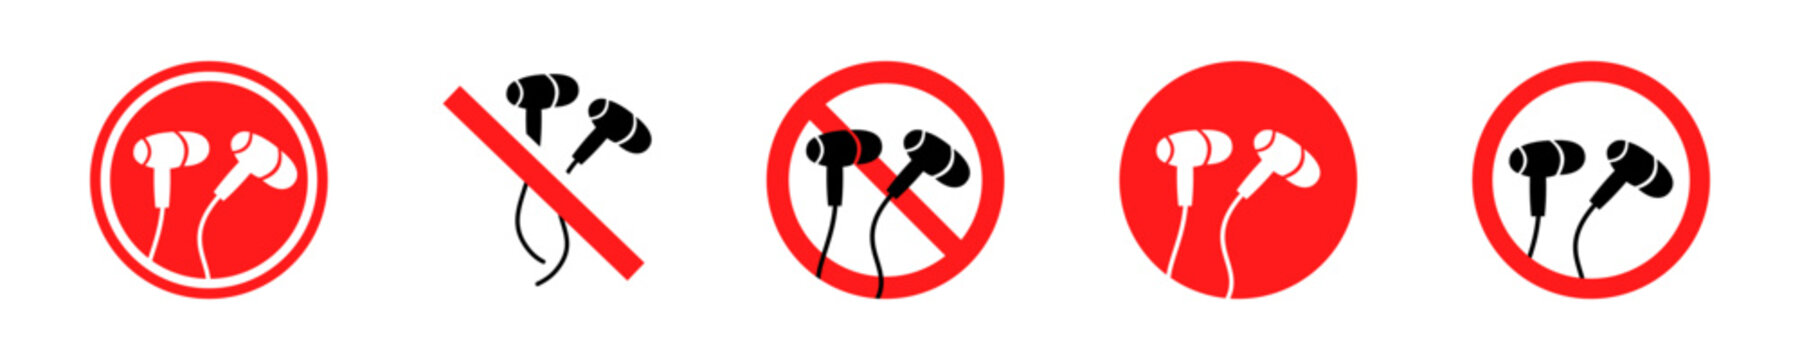 Set of no headphones vector icons. Ban or forbidden use earbuds. Red forbidden signs. 